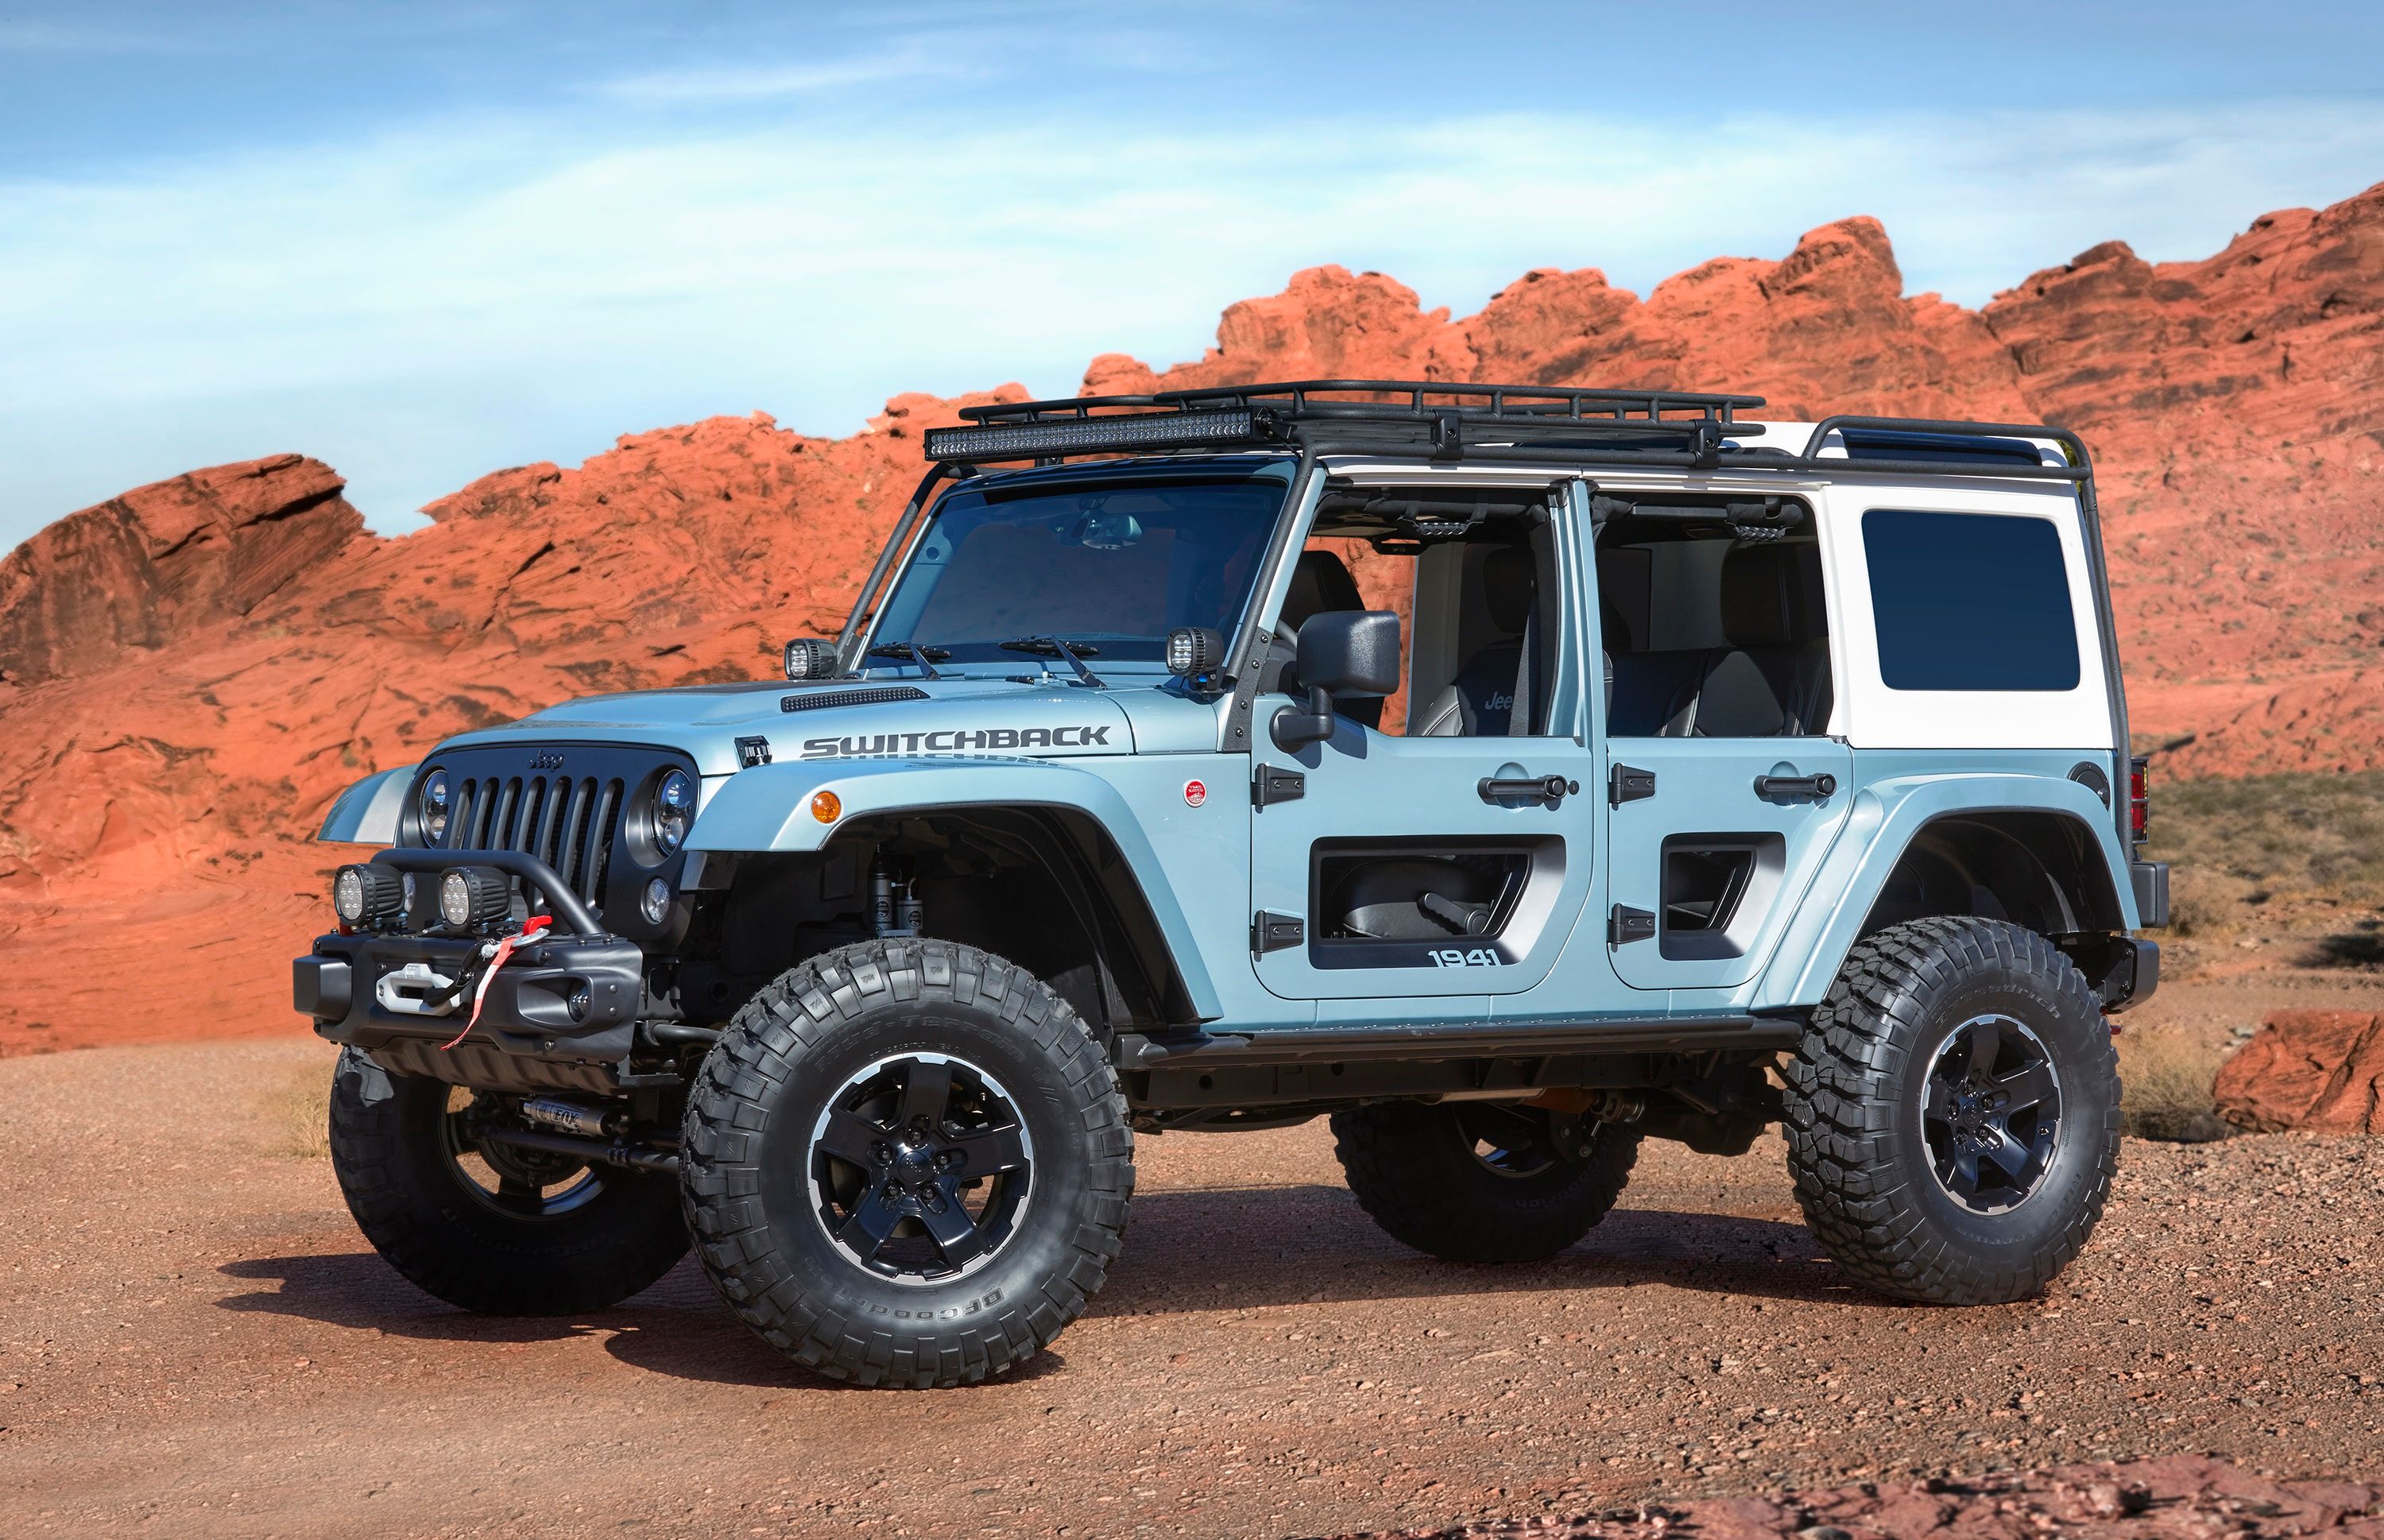 2017 Jeep Switchback Concept